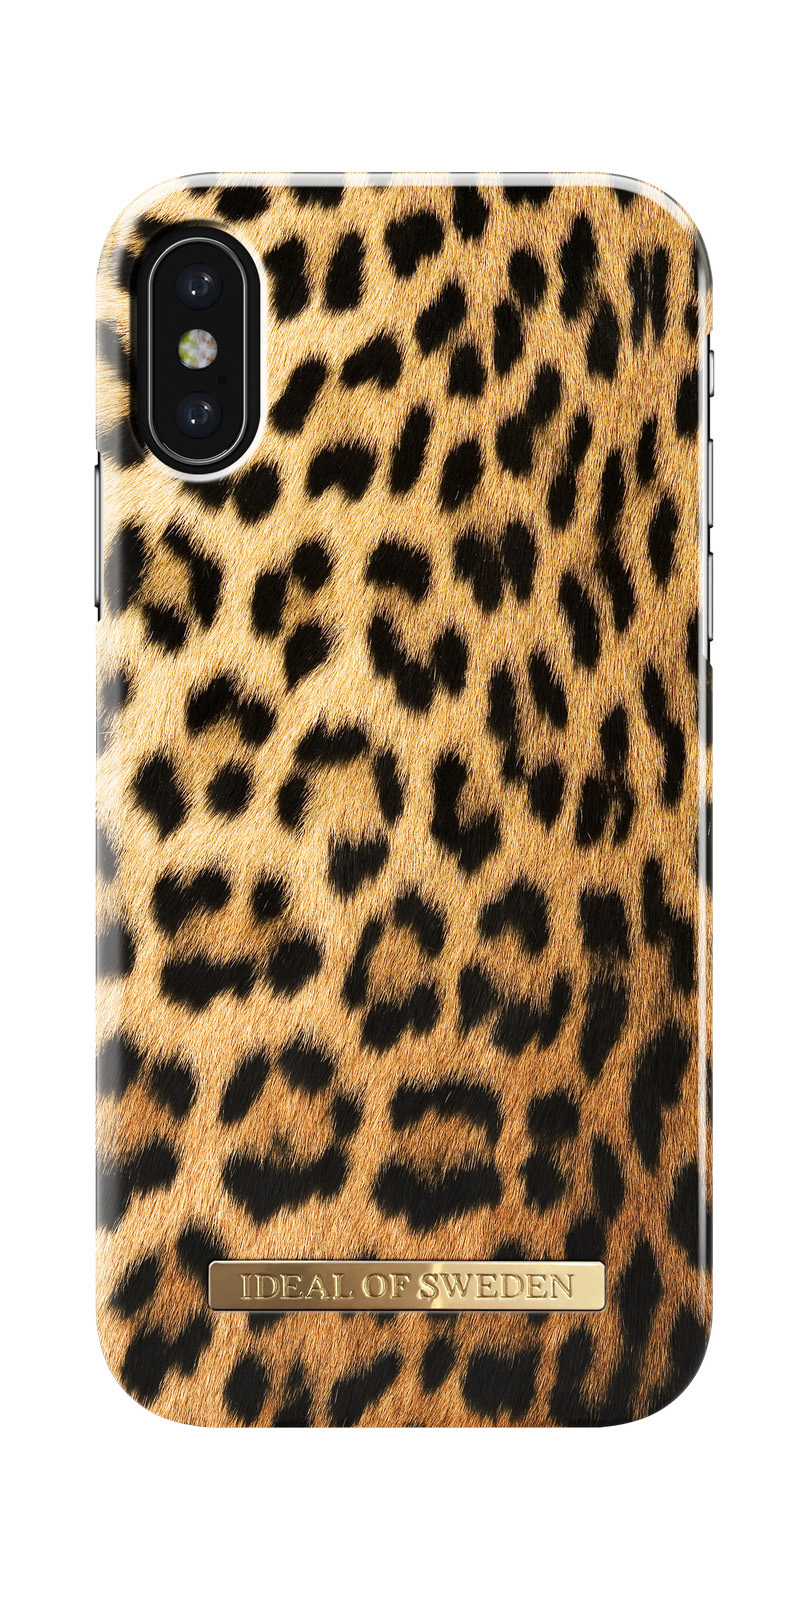 IDEAL OF SWEDEN Fashion, Backcover, Wild X, Apple, iPhone Leopard